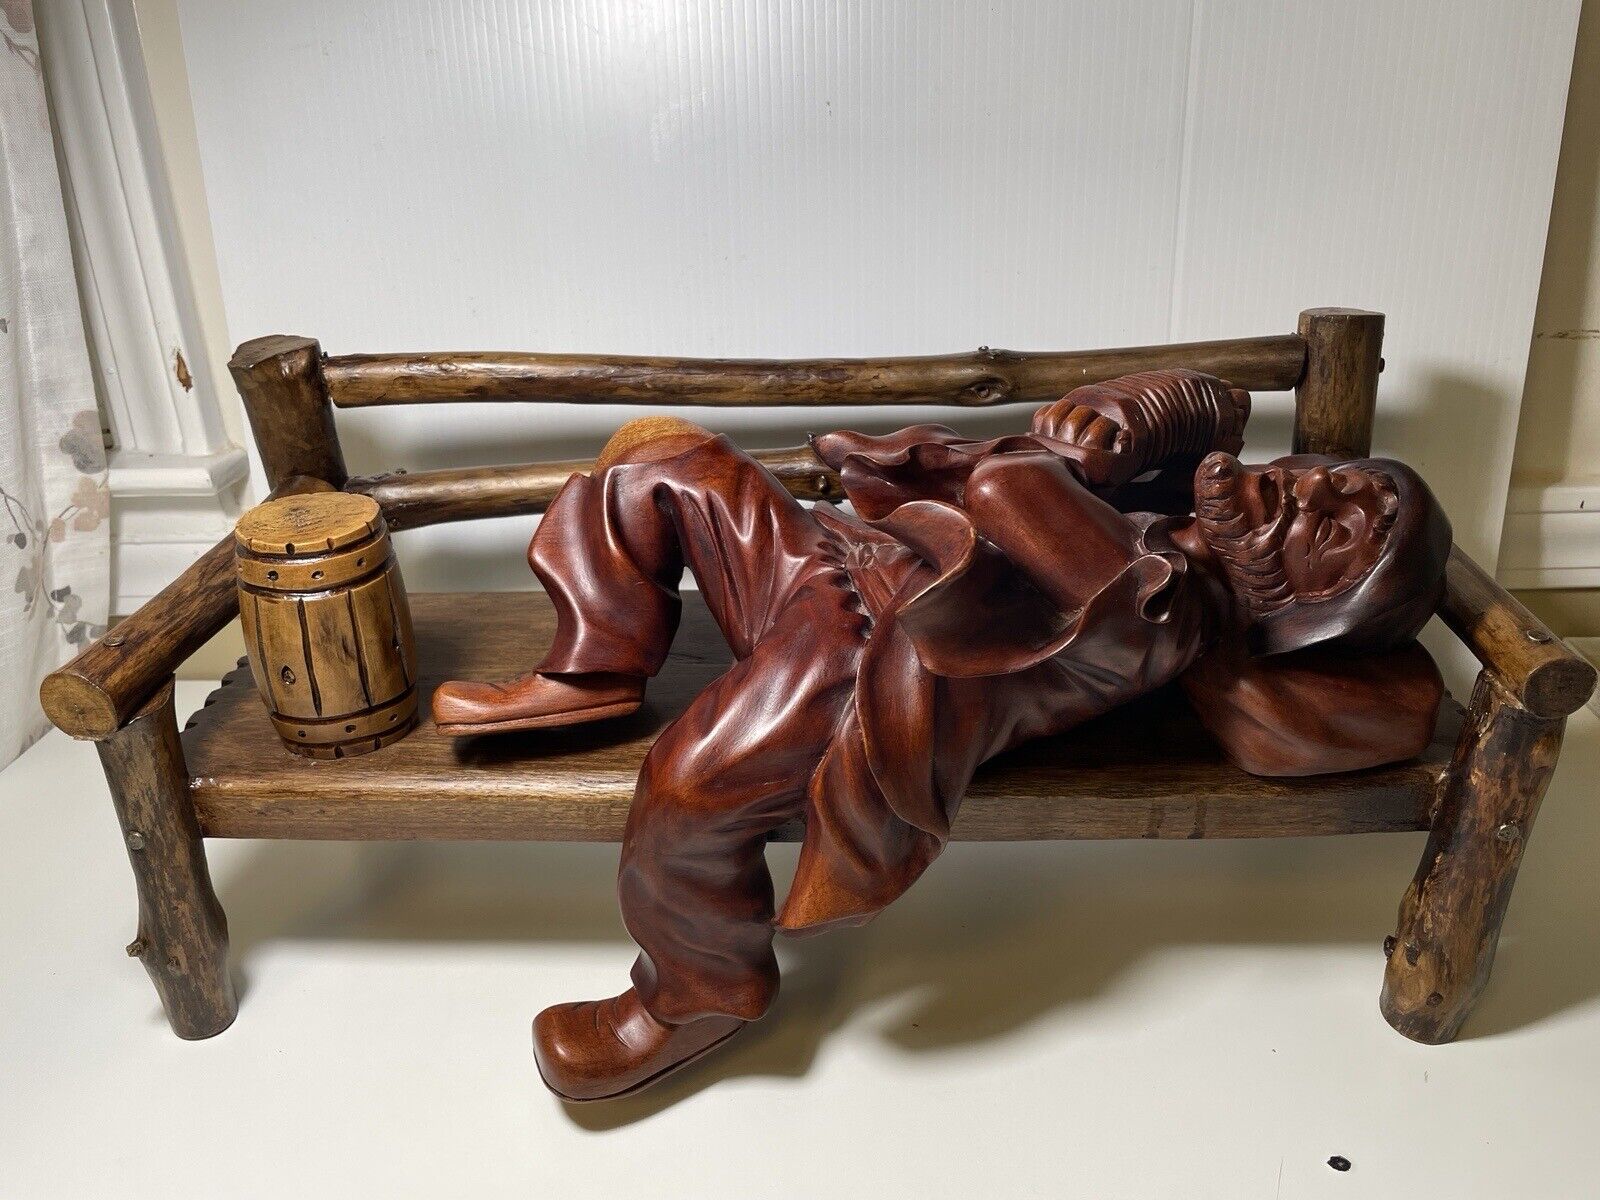 Vintage Large Wood Carving Figurine Drunk Man Sleeping On Bench With Accordion